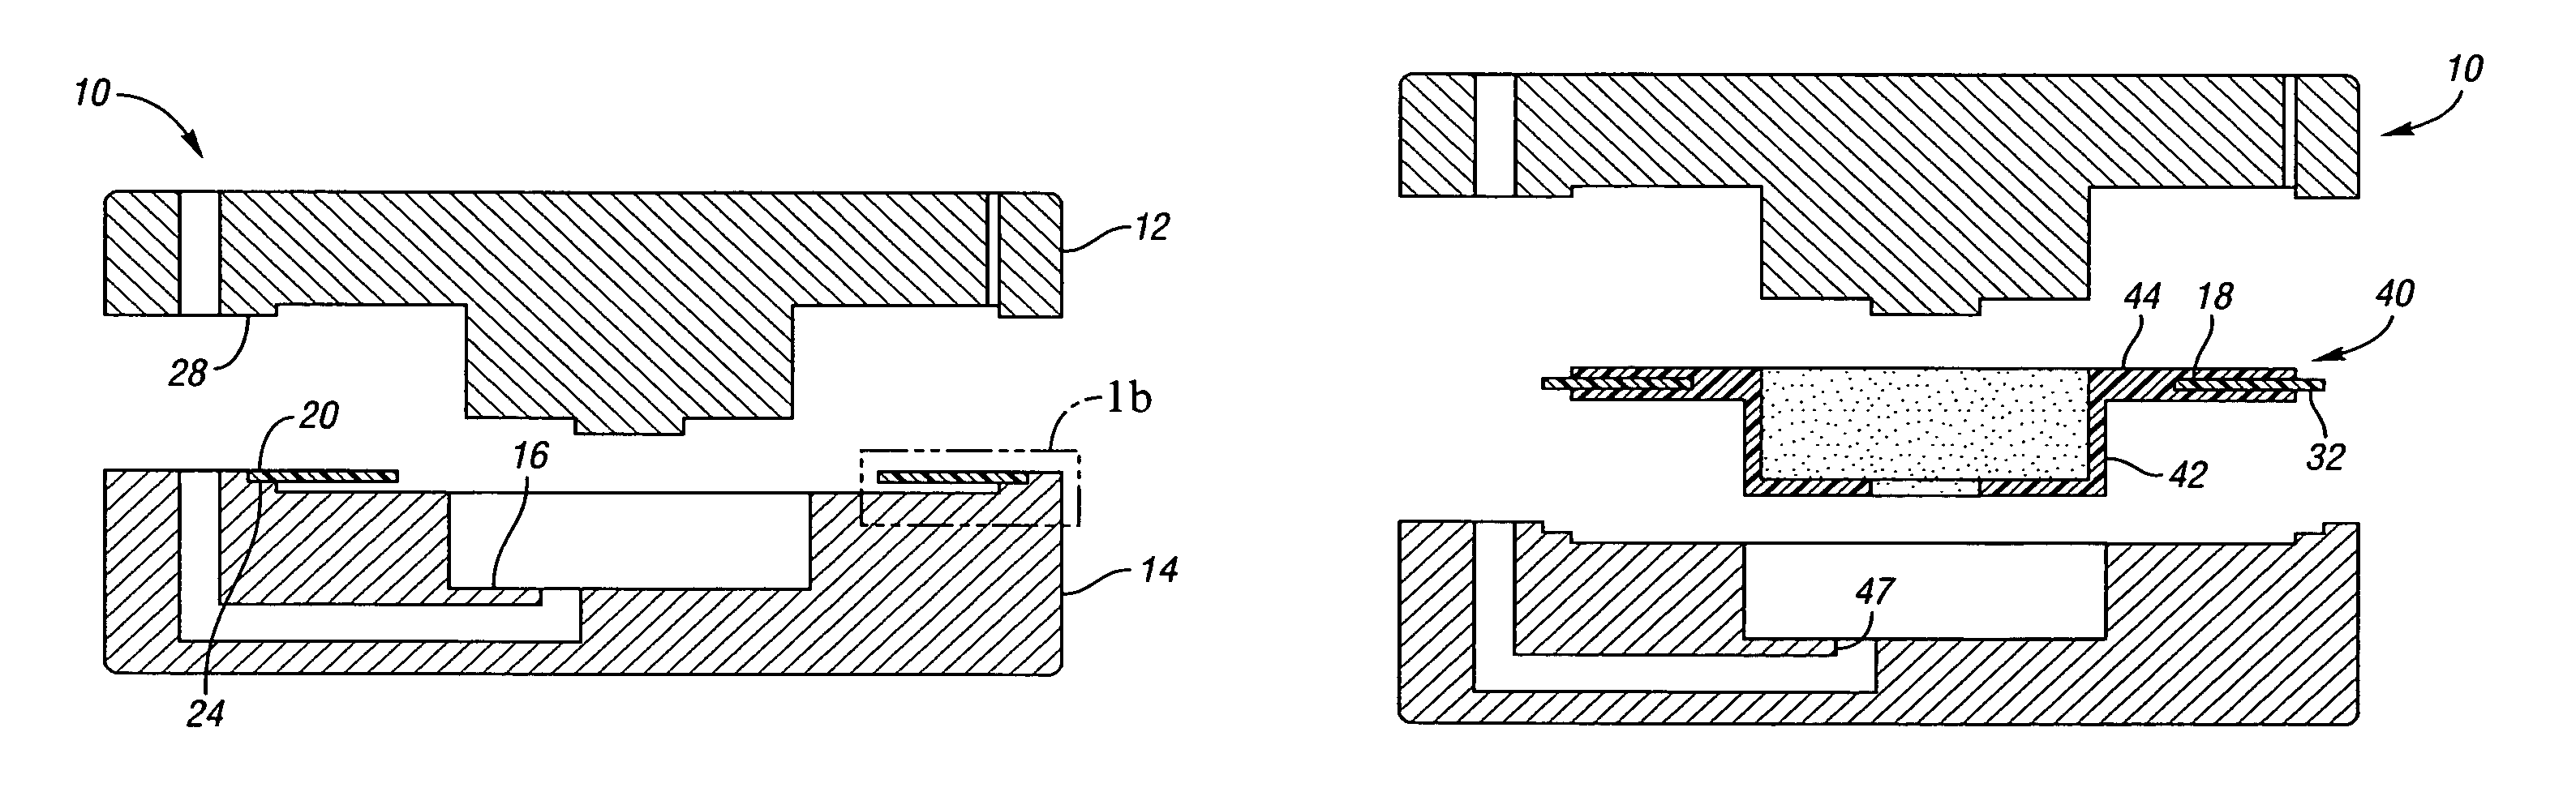 Method of manufacturing a friction damped disc brake rotor